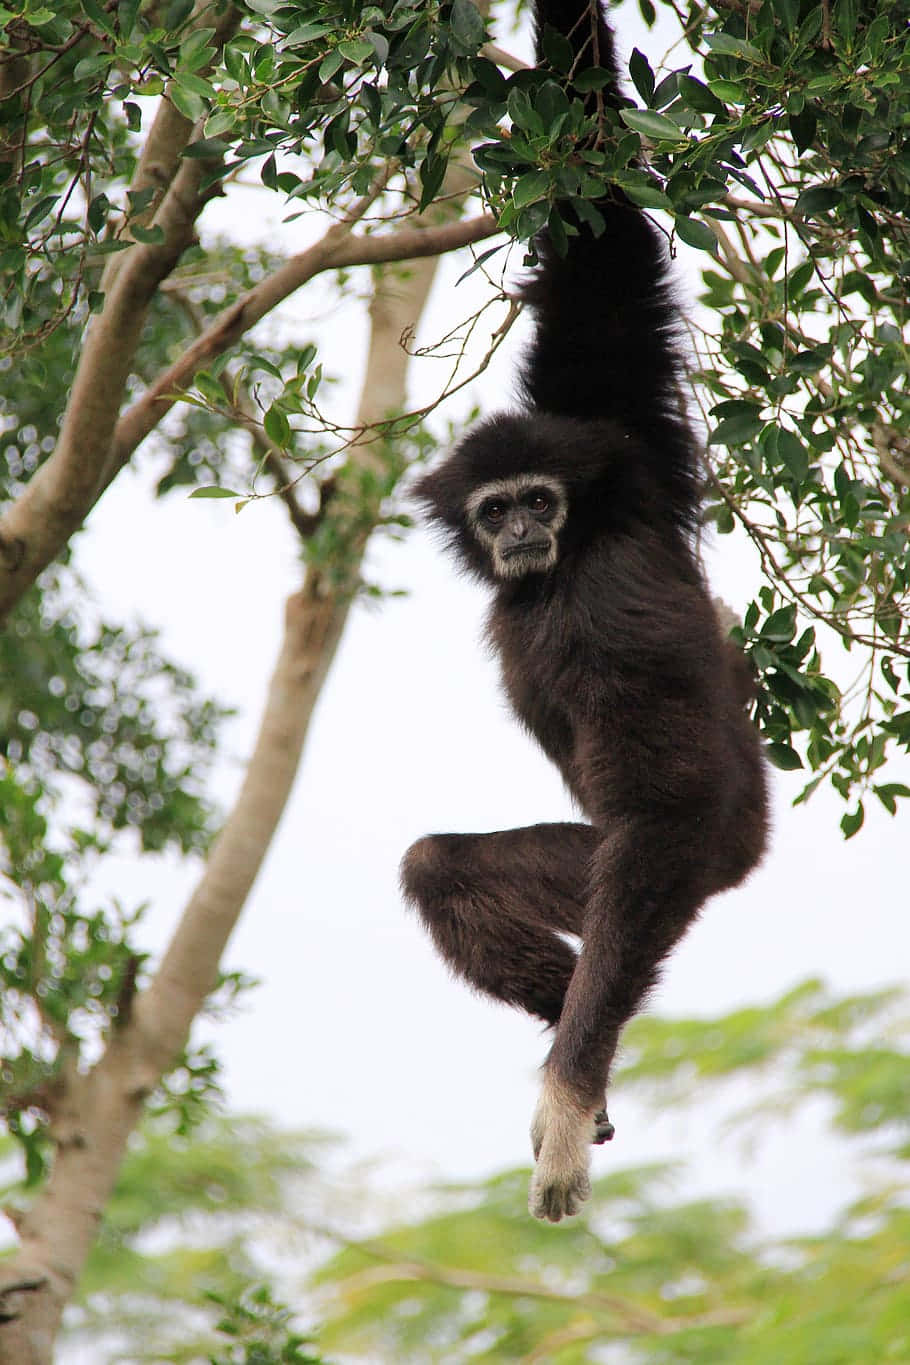 An Android Gibbon in its natural environment